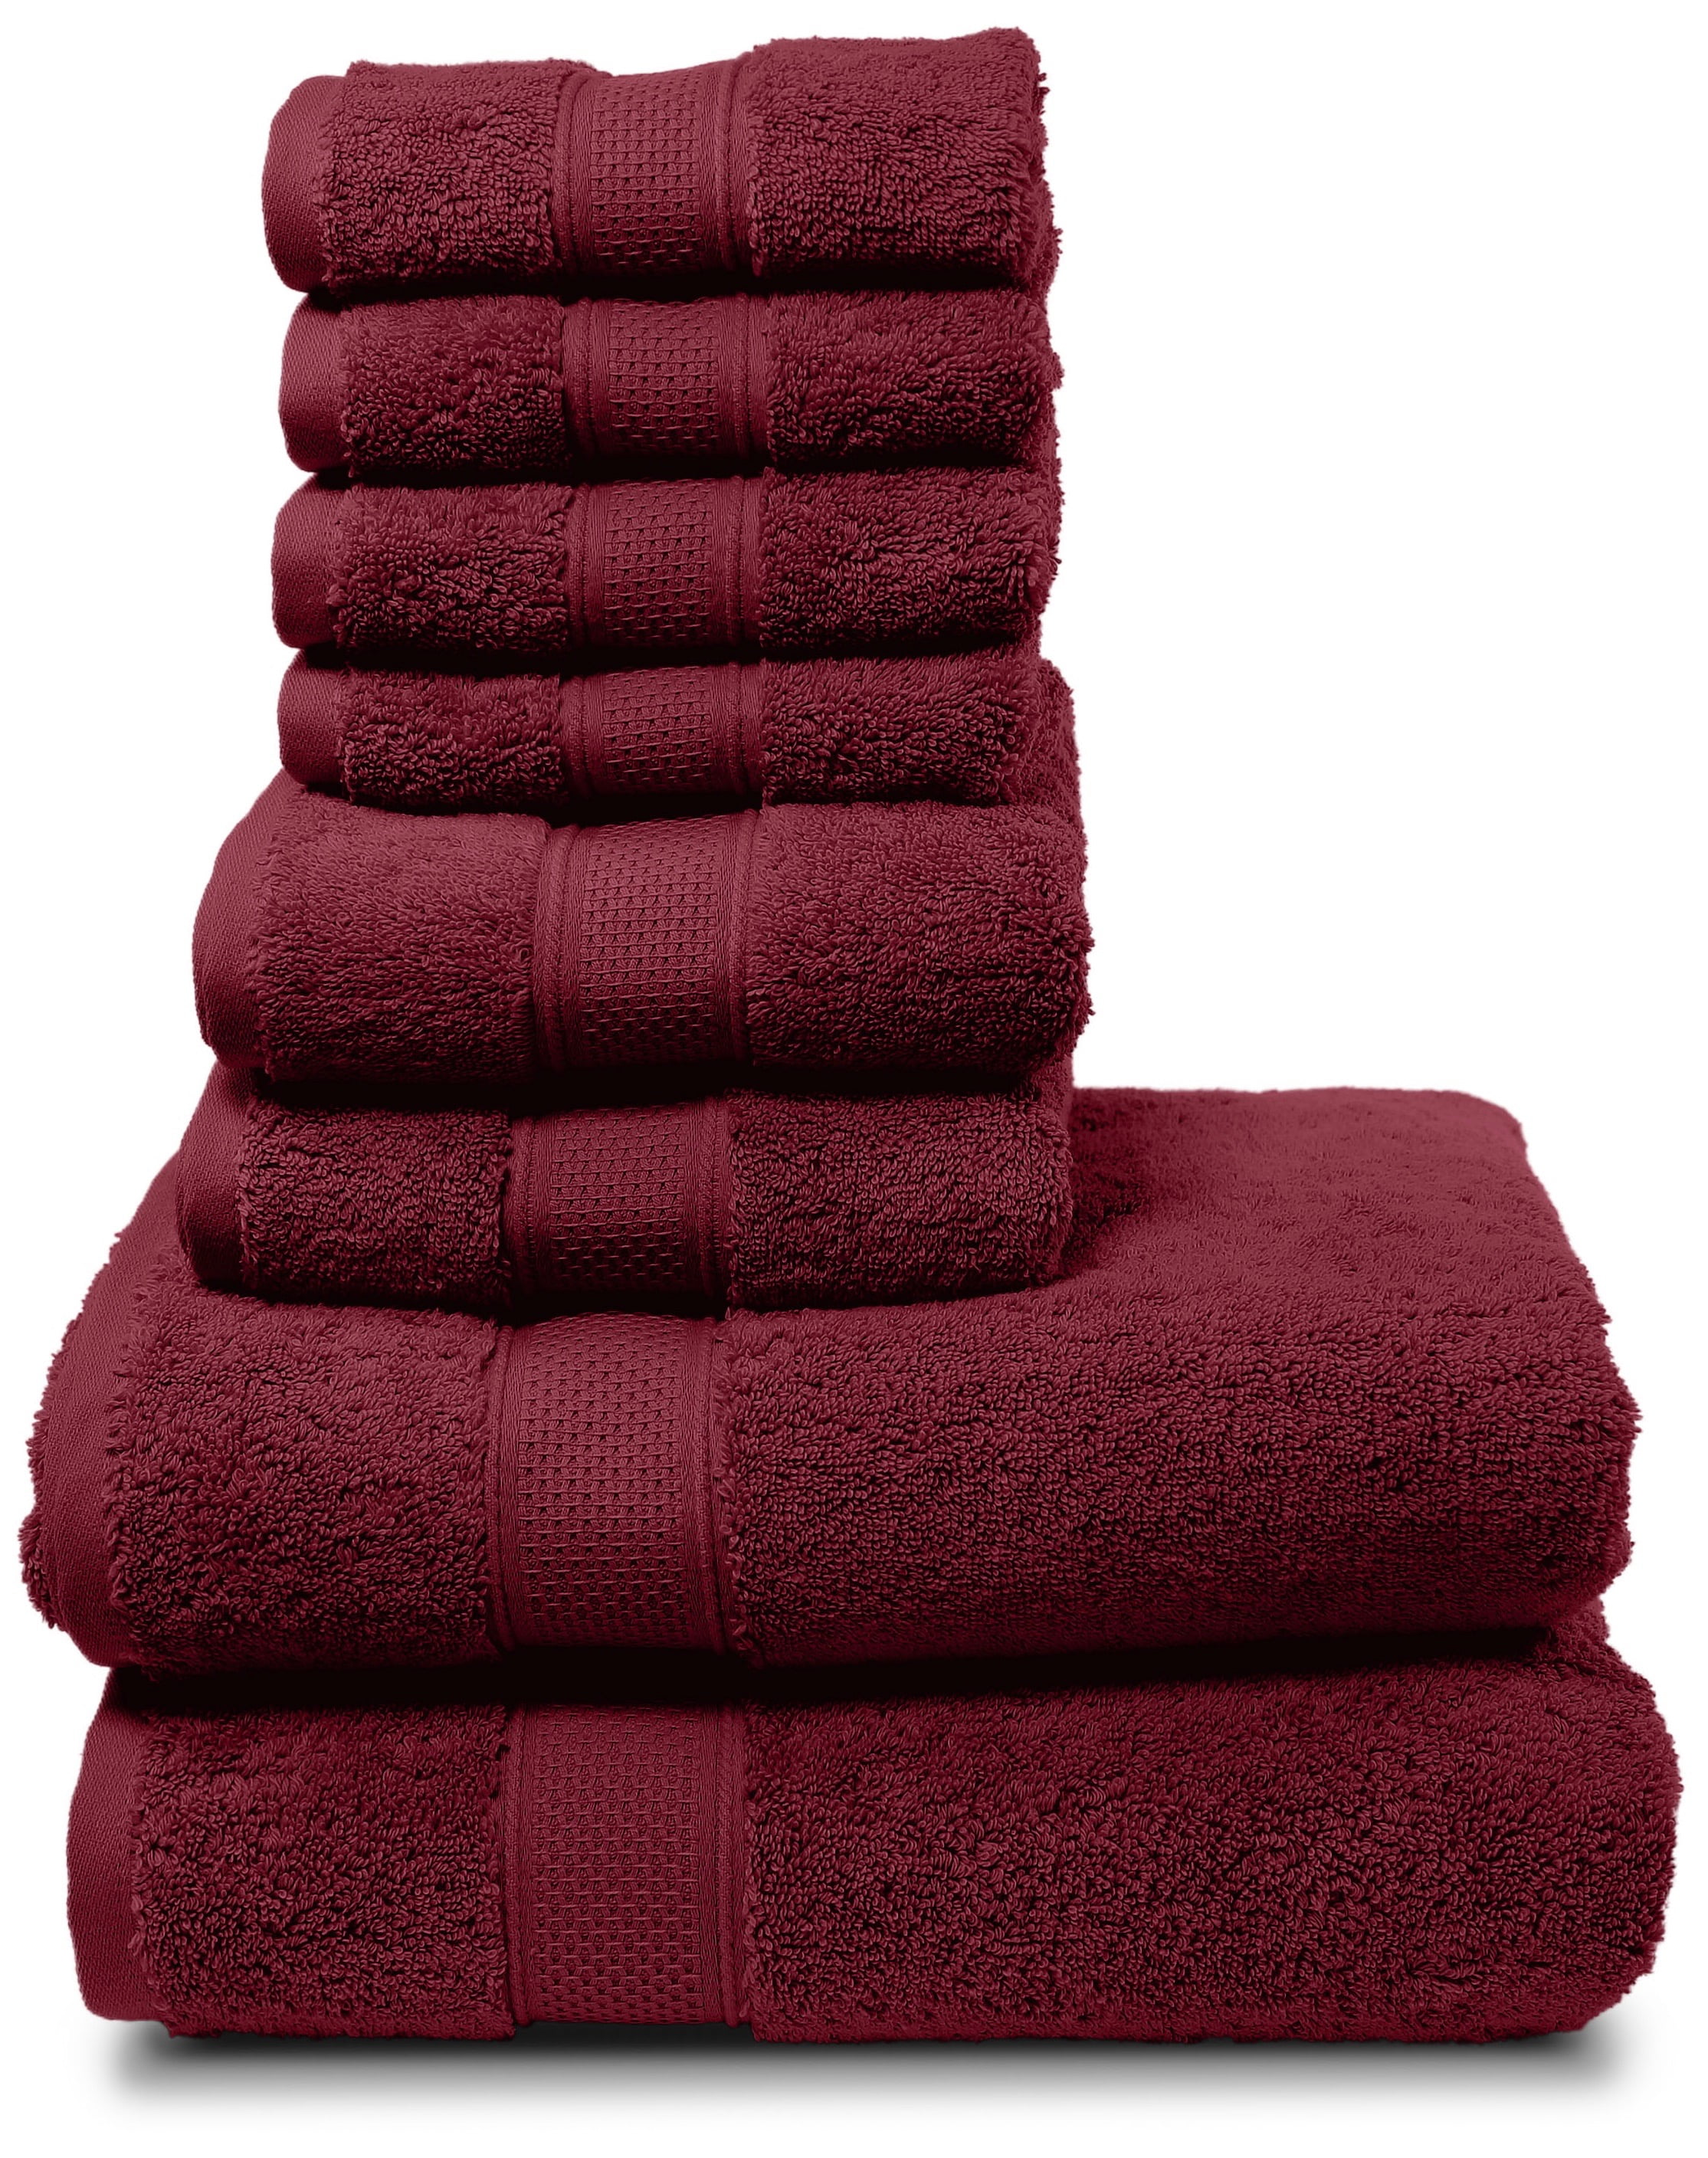 Maura 4 Piece Bath Towel Set. 2017(New Collection).Premium Quality Turkish Towels. Super Soft, Plush and Highly Absorbent. Set Includ